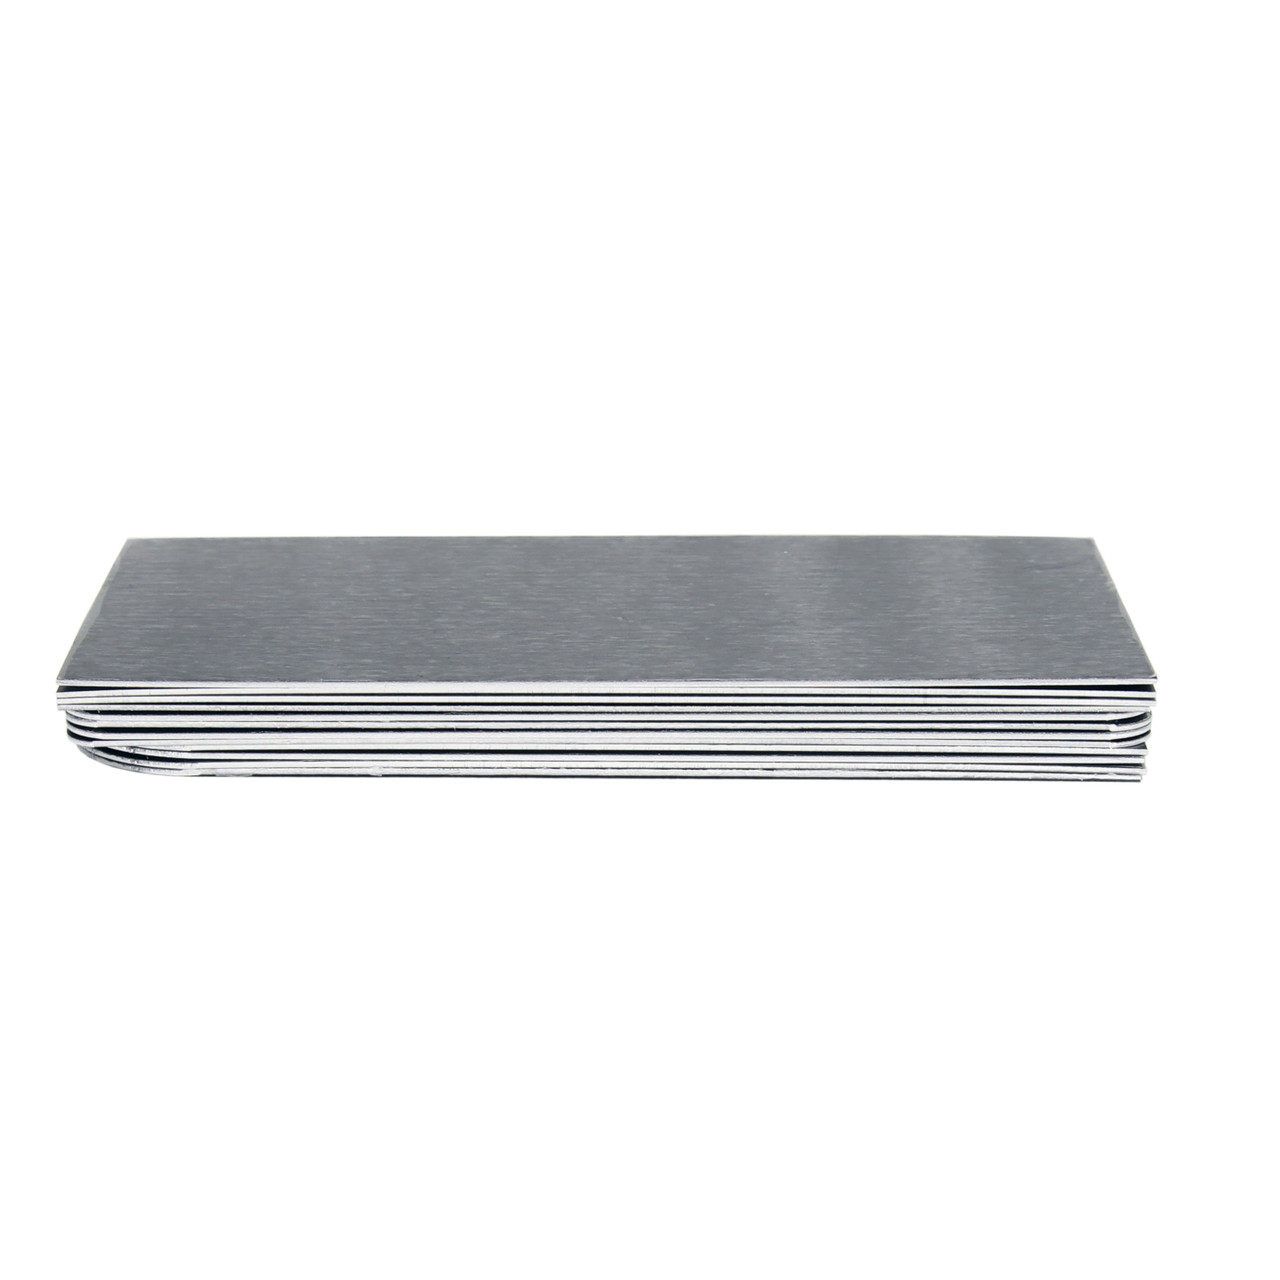 10 Pcs Blank Metal Card 100x60x1mm Anodized Aluminum Plate for DIY